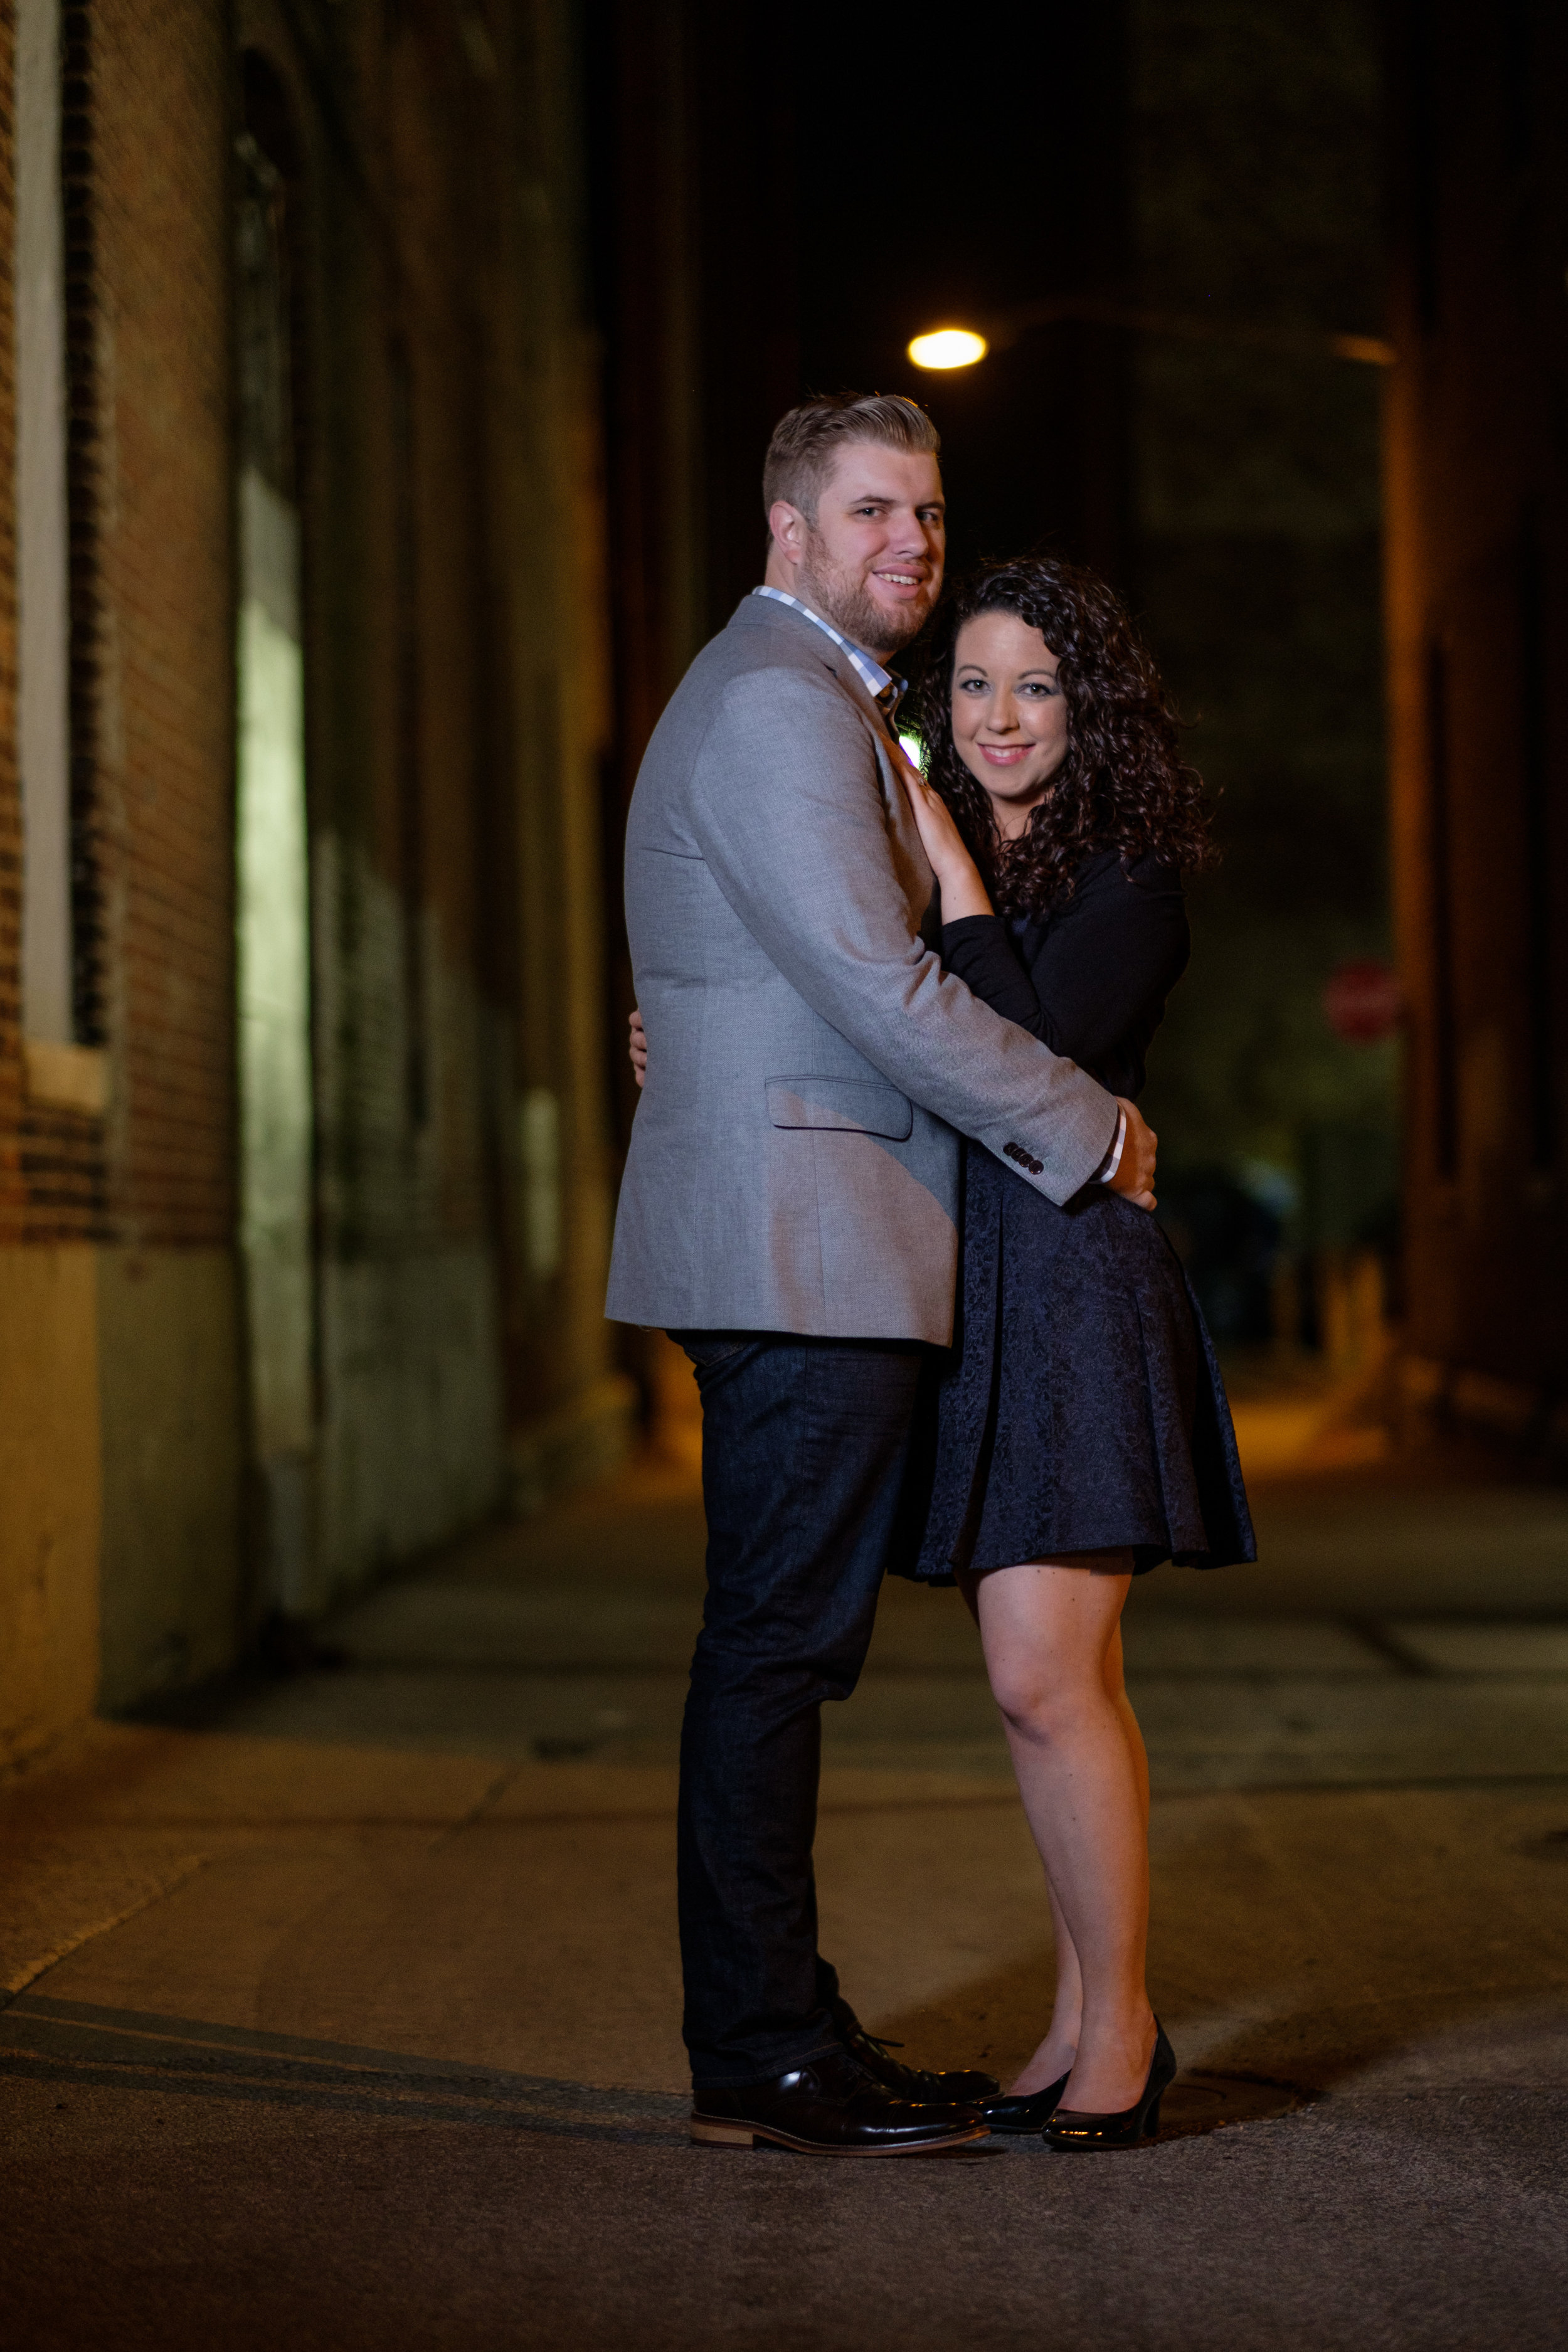 Downtown-Indianapolis-night-engagement-pictures-18.jpg